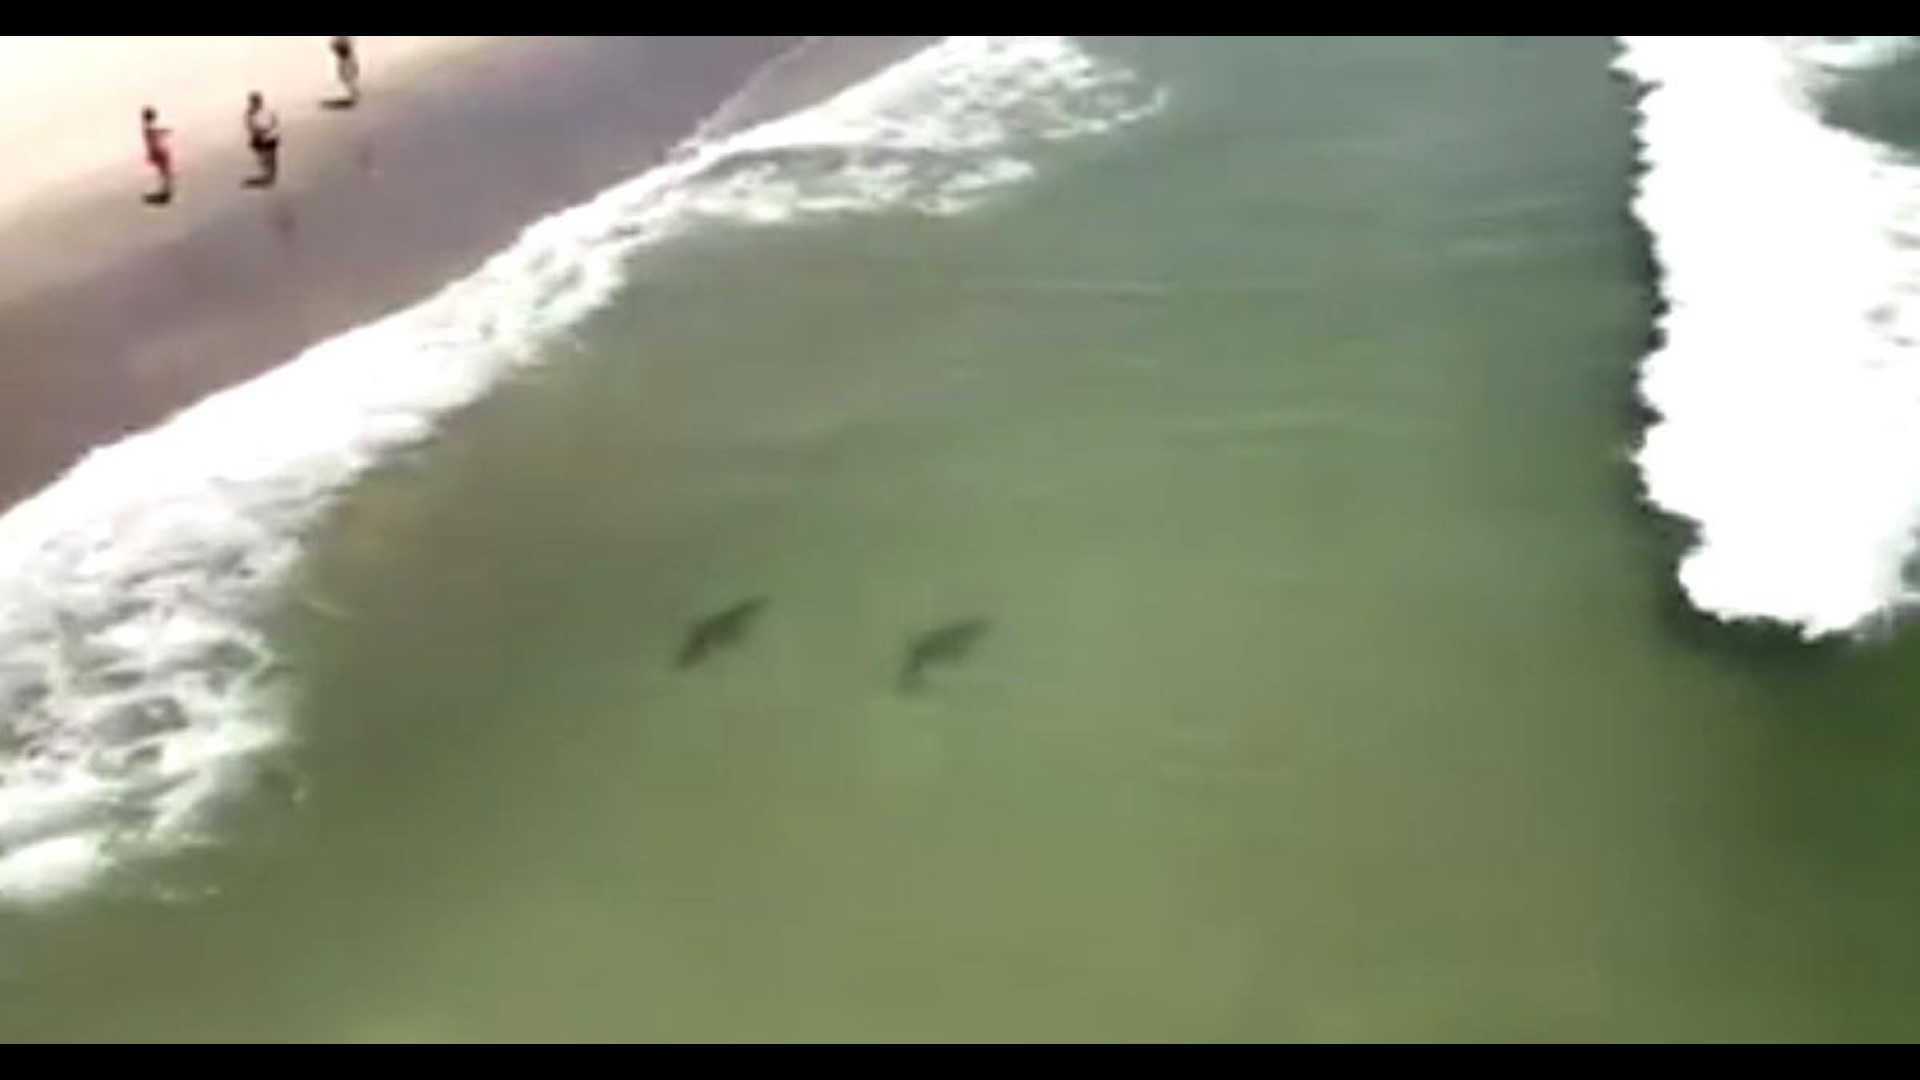 Video shows sharks swimming close to shore at Myrtle Beach